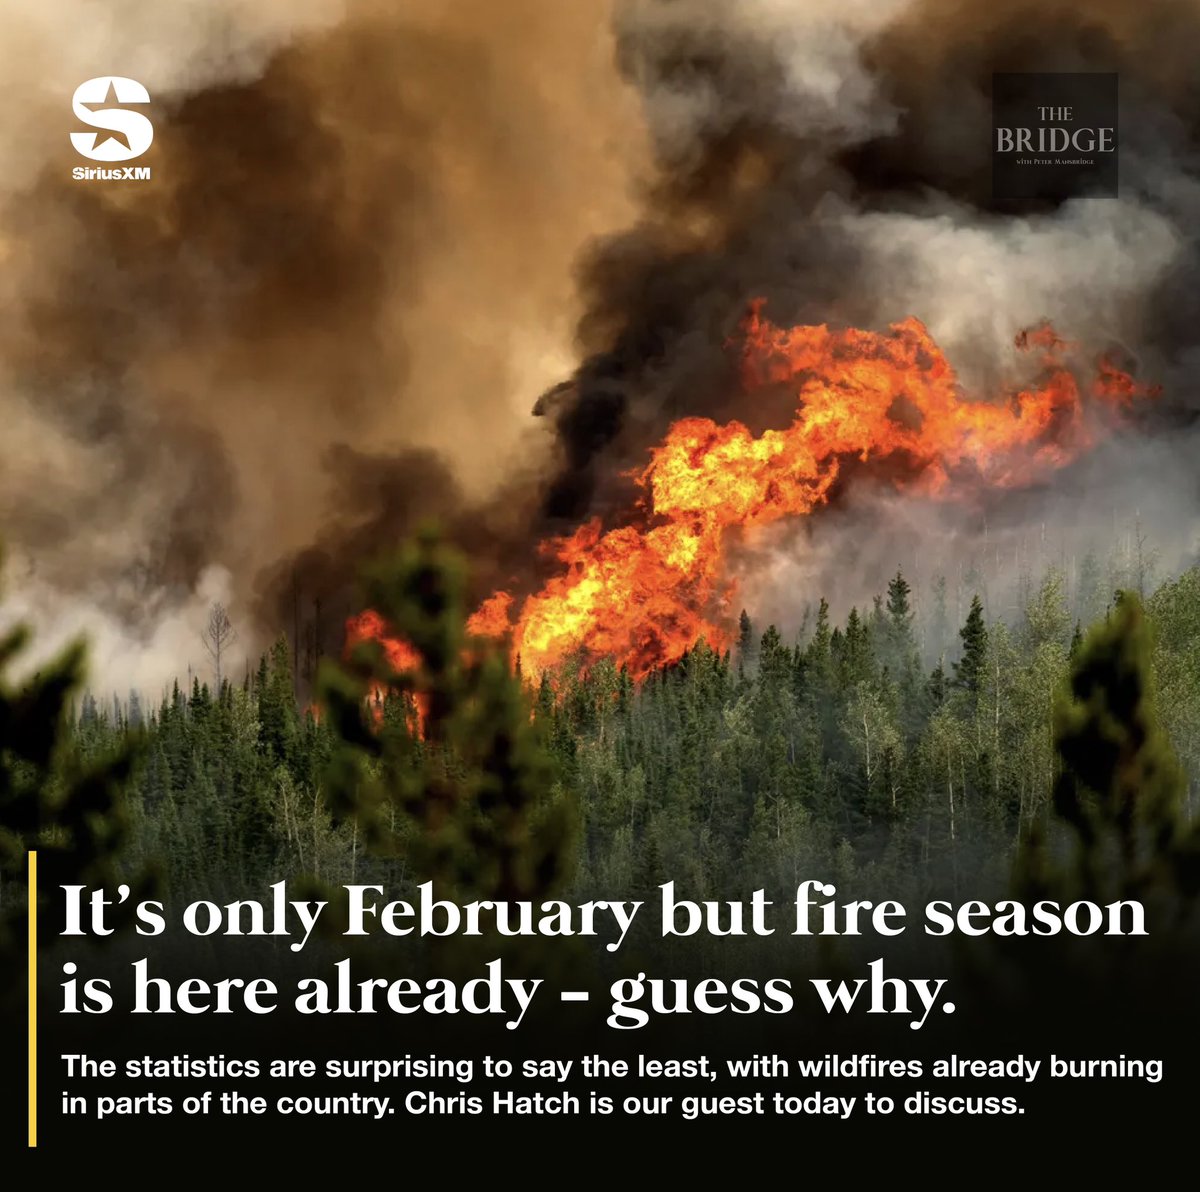 Are we really prepared for the effects of climate change in Canada, from fires to drought? @zerocarbon covers climate for the National Observer and brings his perspective today on The Bridge. Listen at noon EST on @CanadaTalks167, or wherever you get your podcasts.